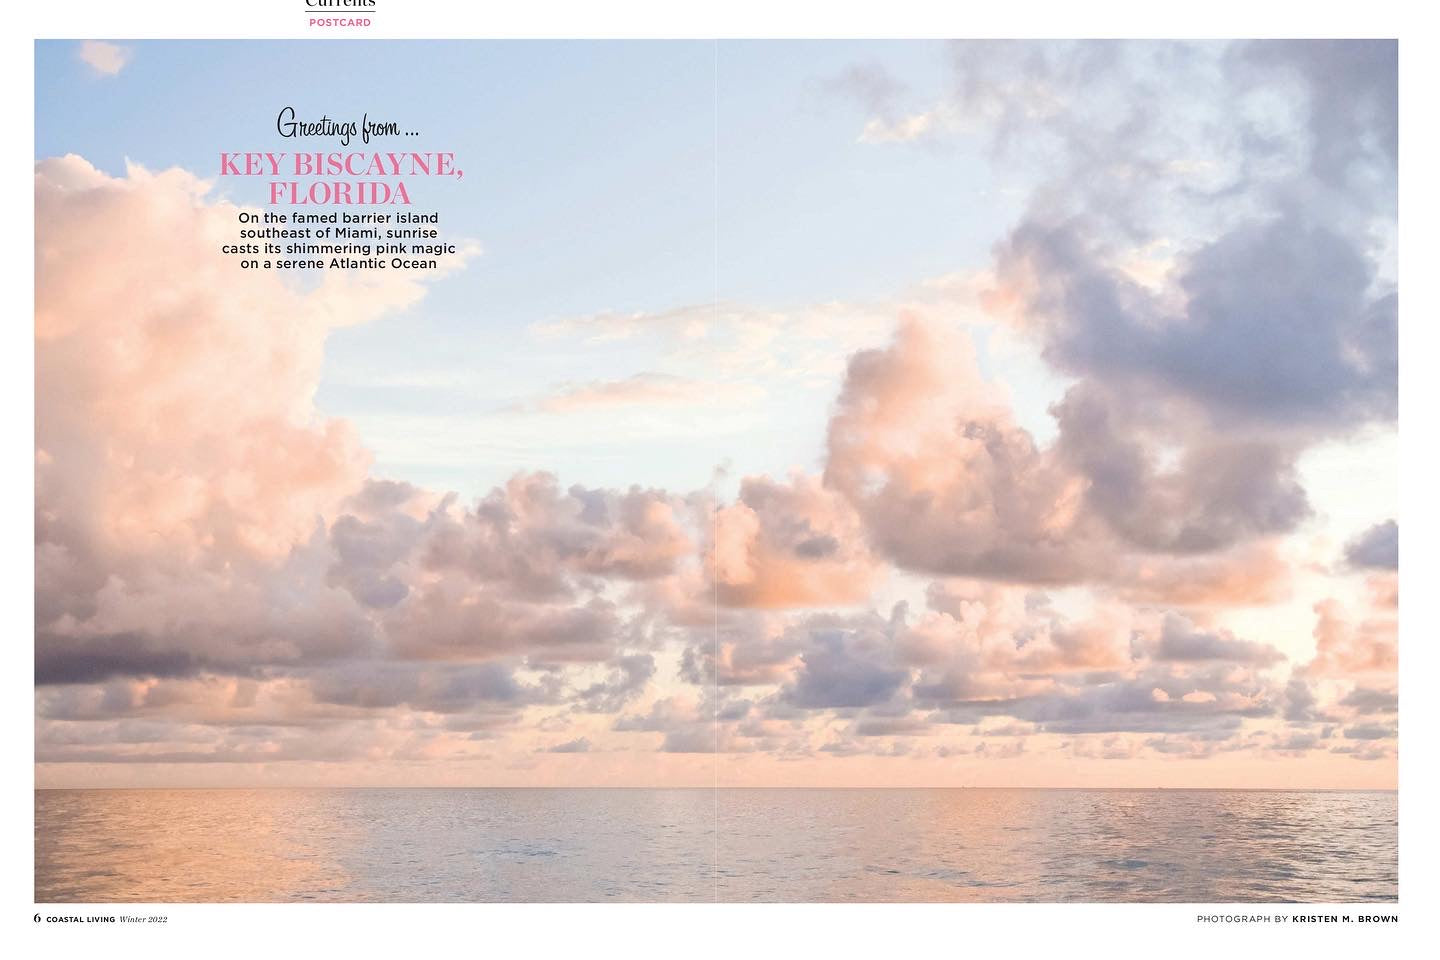 Coastal Living Winter 2022 edition featuring photography by Kristen M. Brown Greetings from Key Biscayne.